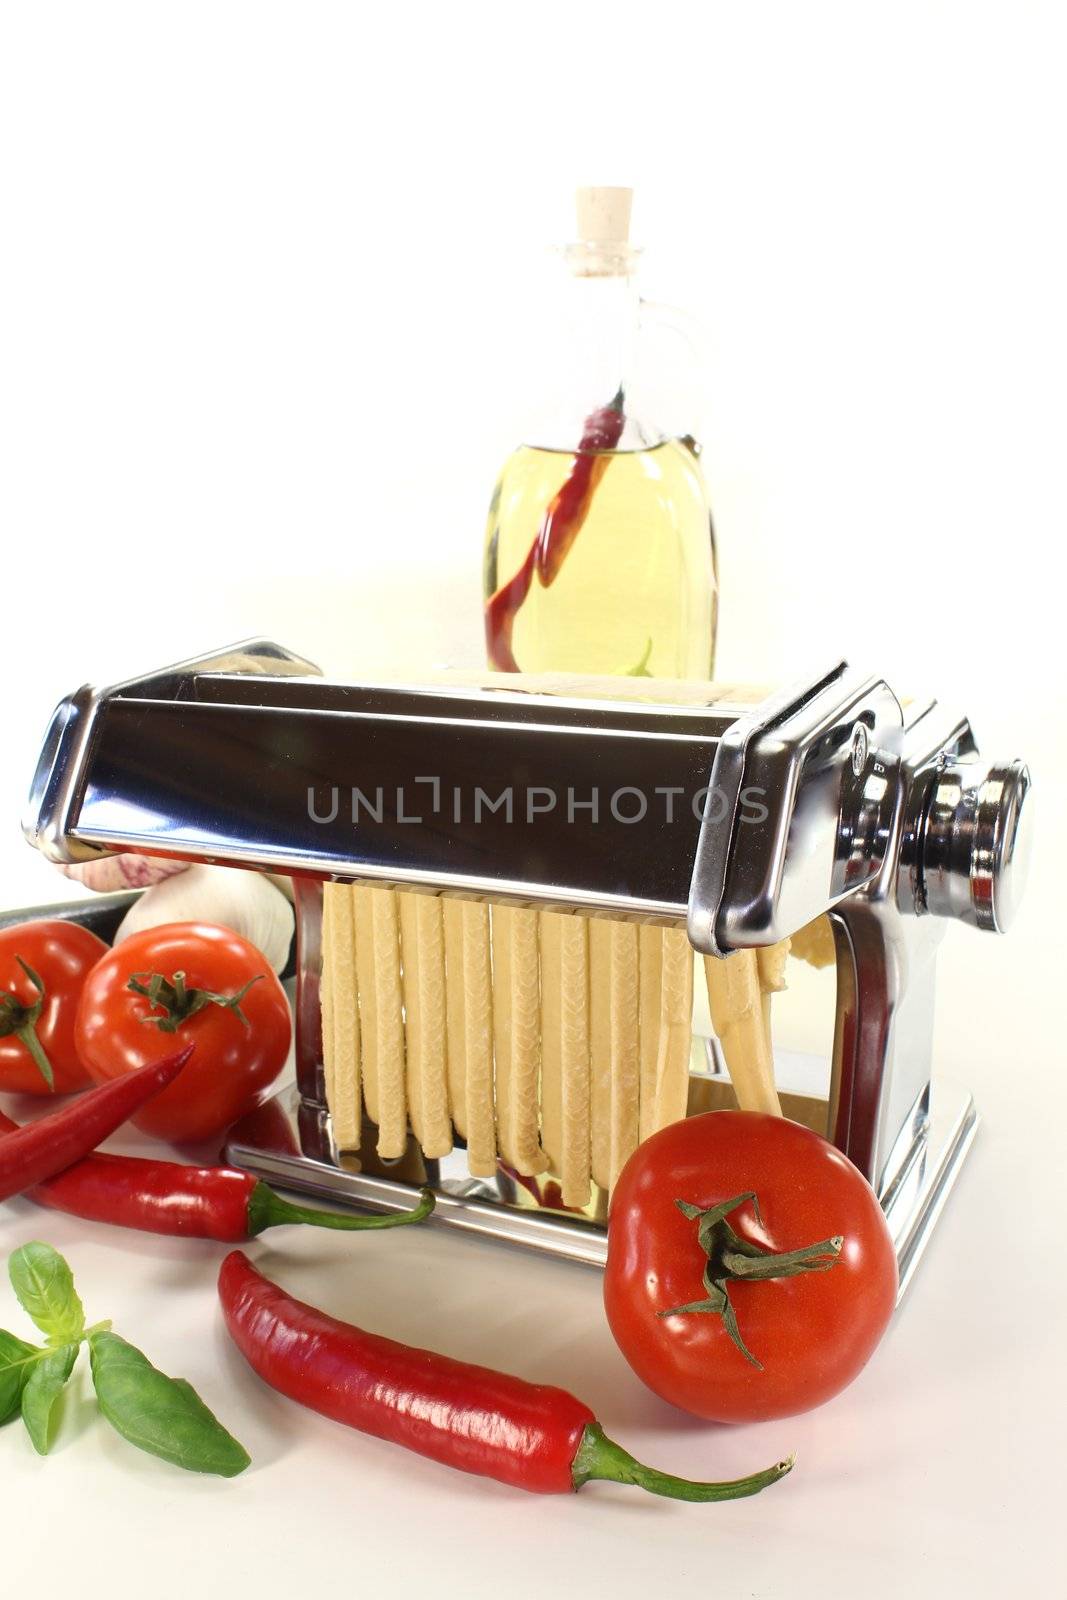 tagliatelle in a pasta machine with tomatoes, cheese and basil